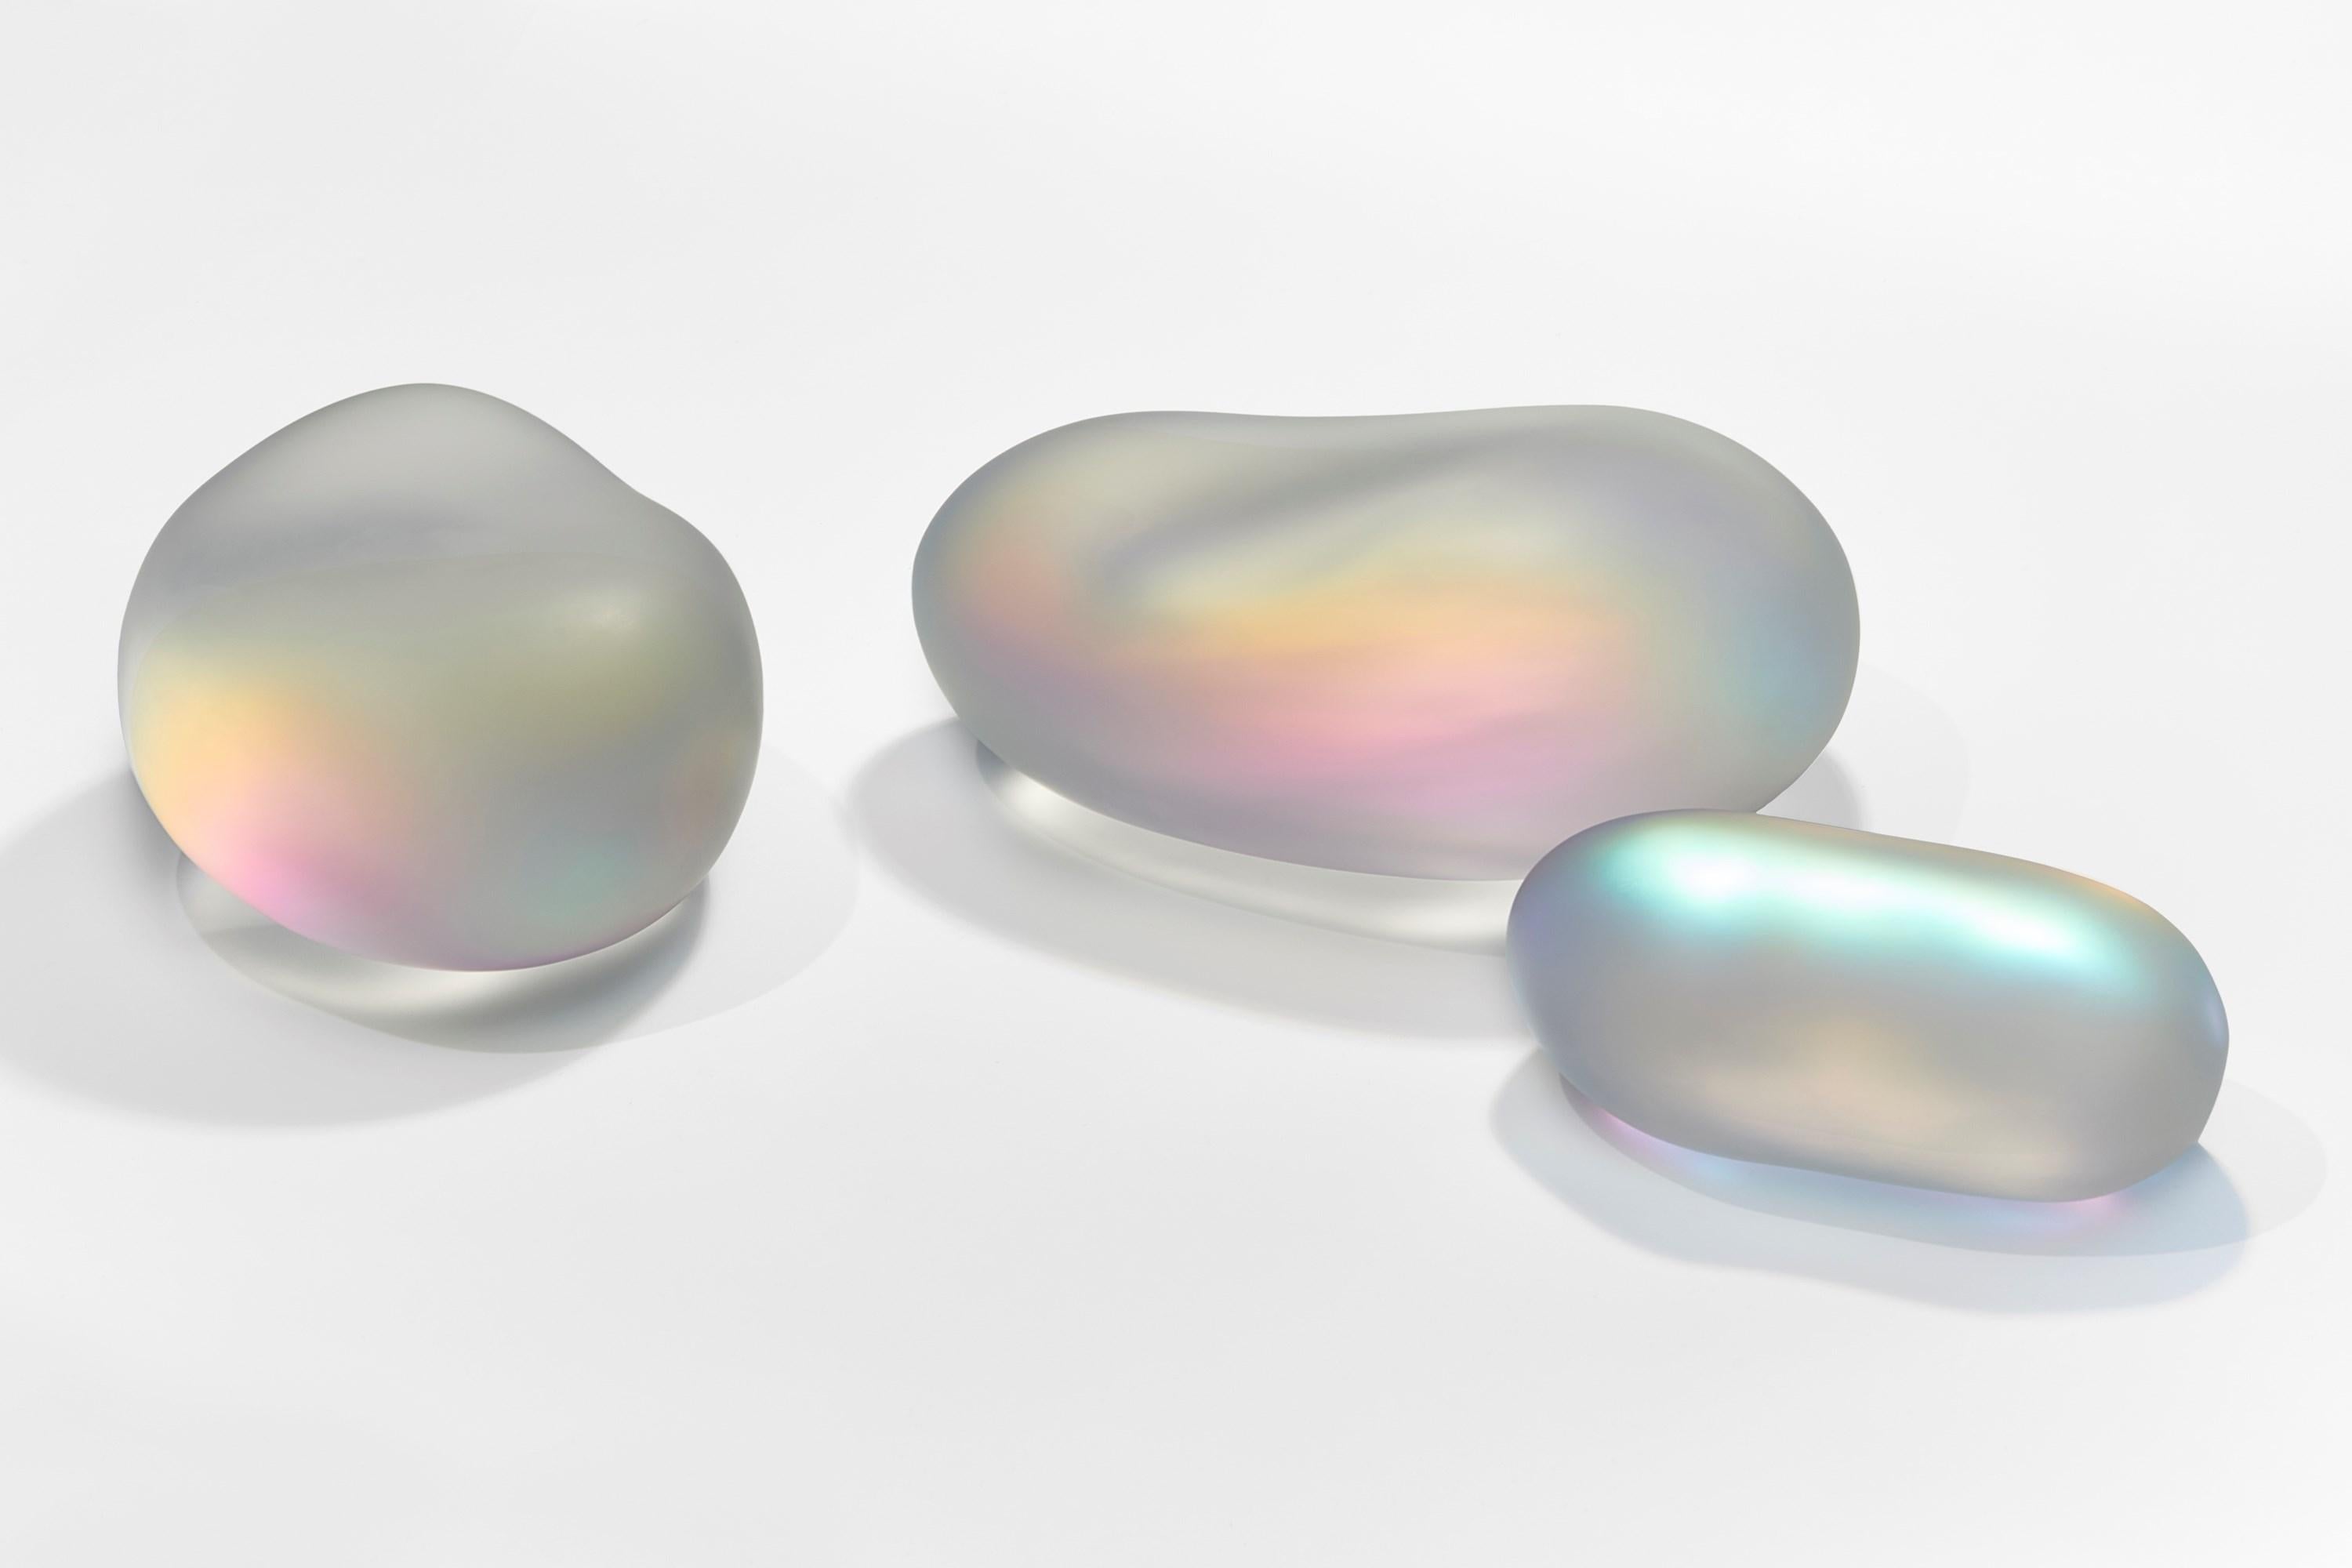 Hand-Crafted  Moon-rock 013, clear glass sculptural rock with iridescent colours by Jon Lewis